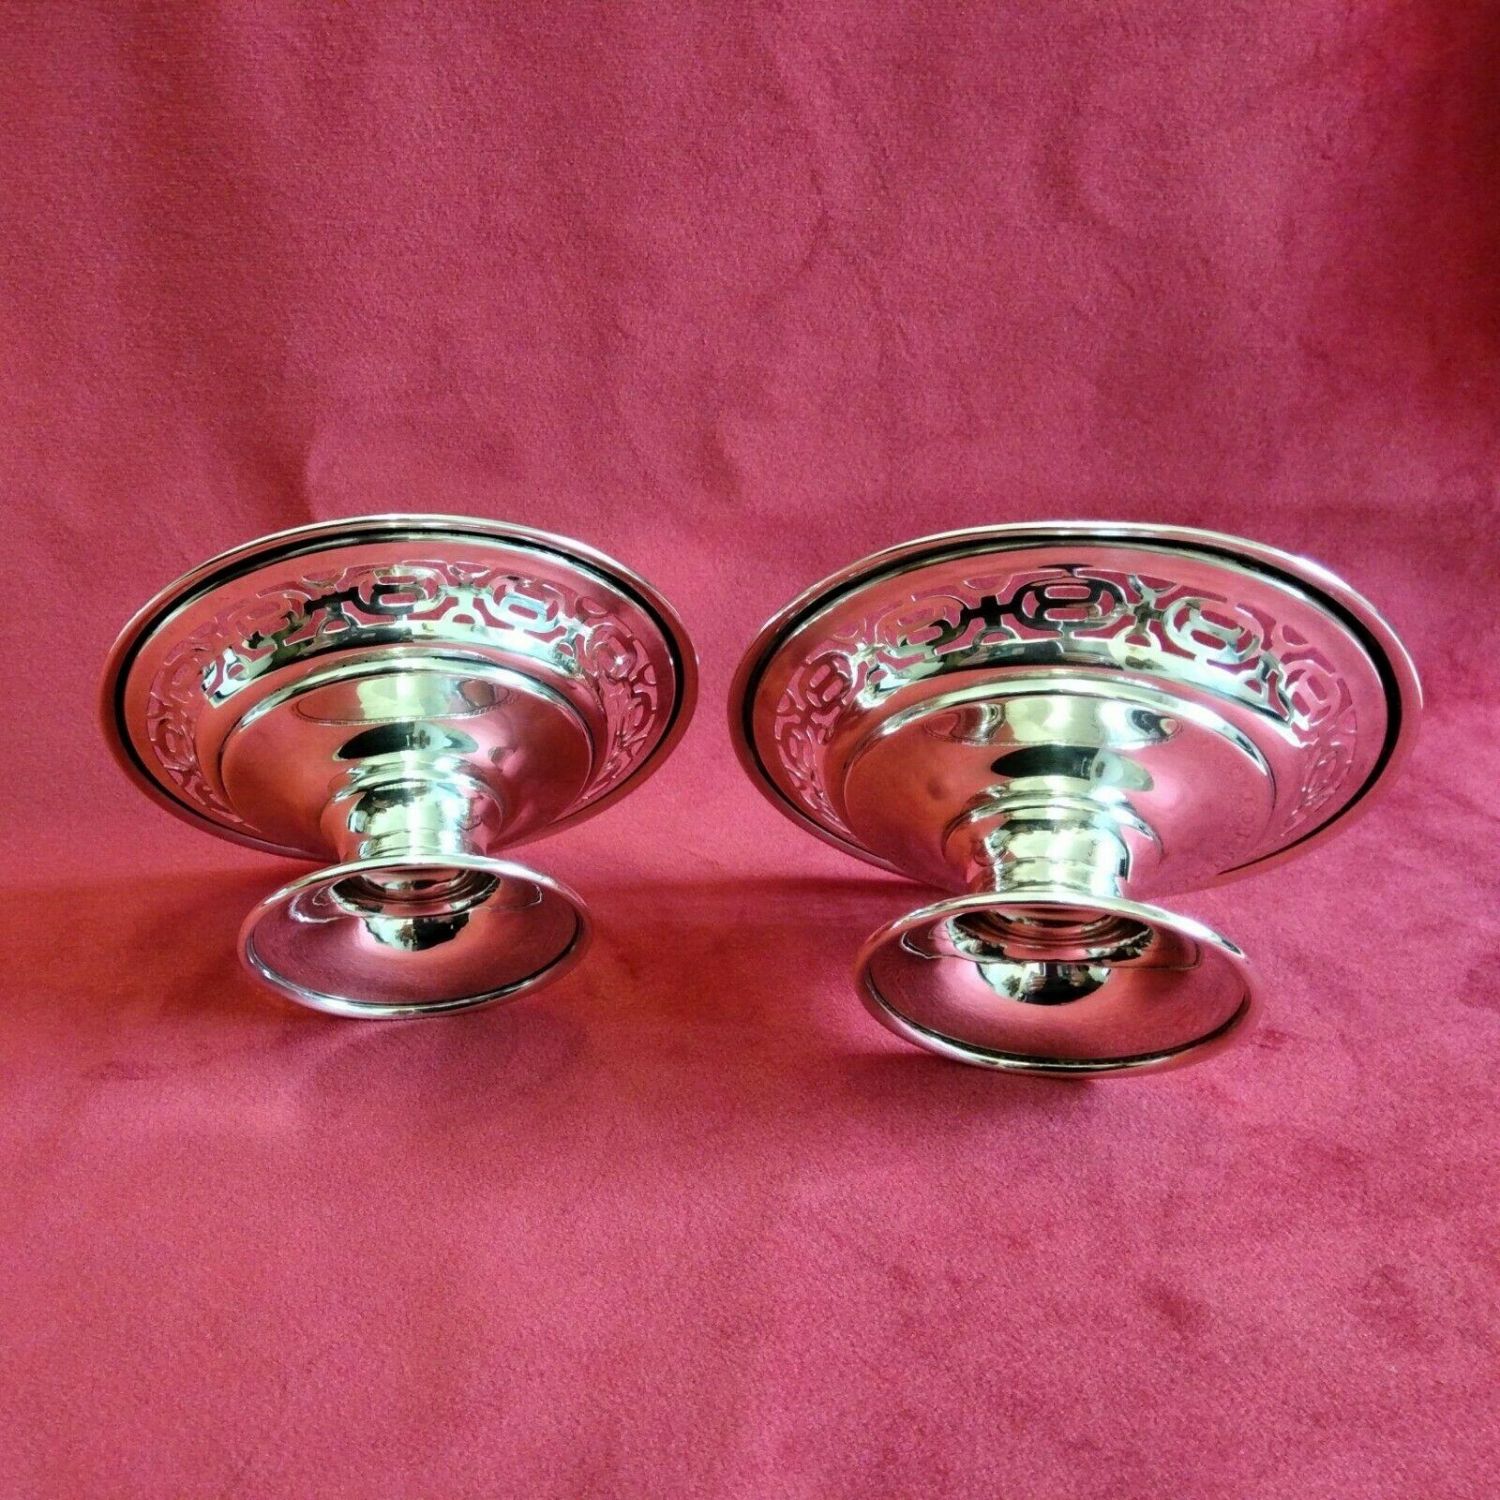 Matching Pair Of Silver Bon Bon Dishes. Walker & Hall 1922 - Gifts for ...